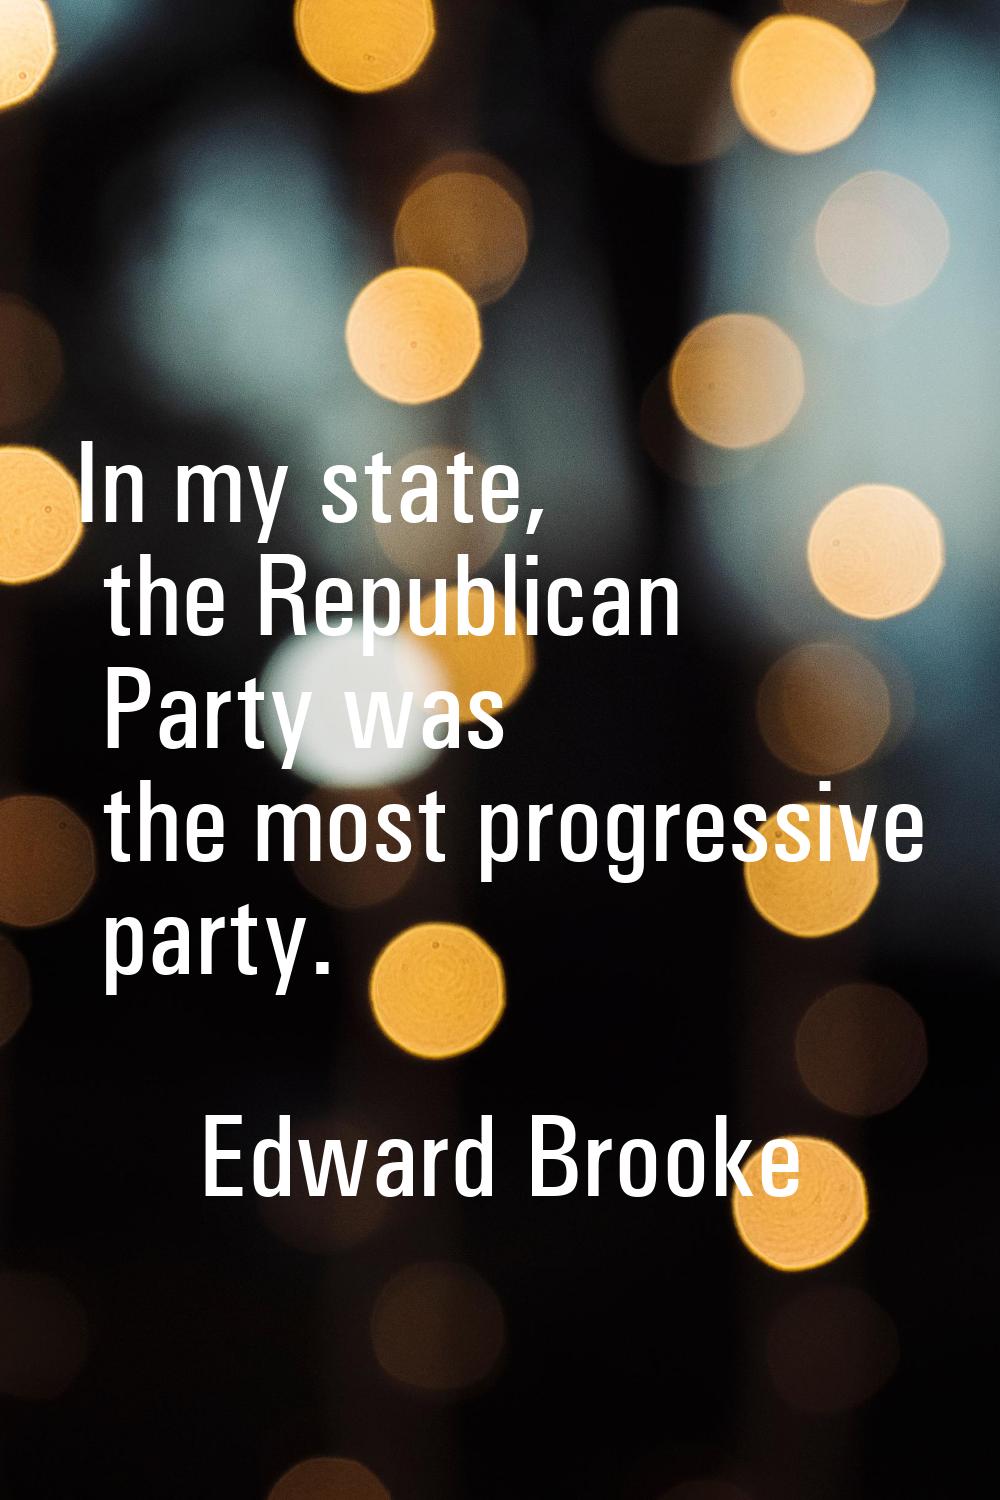 In my state, the Republican Party was the most progressive party.